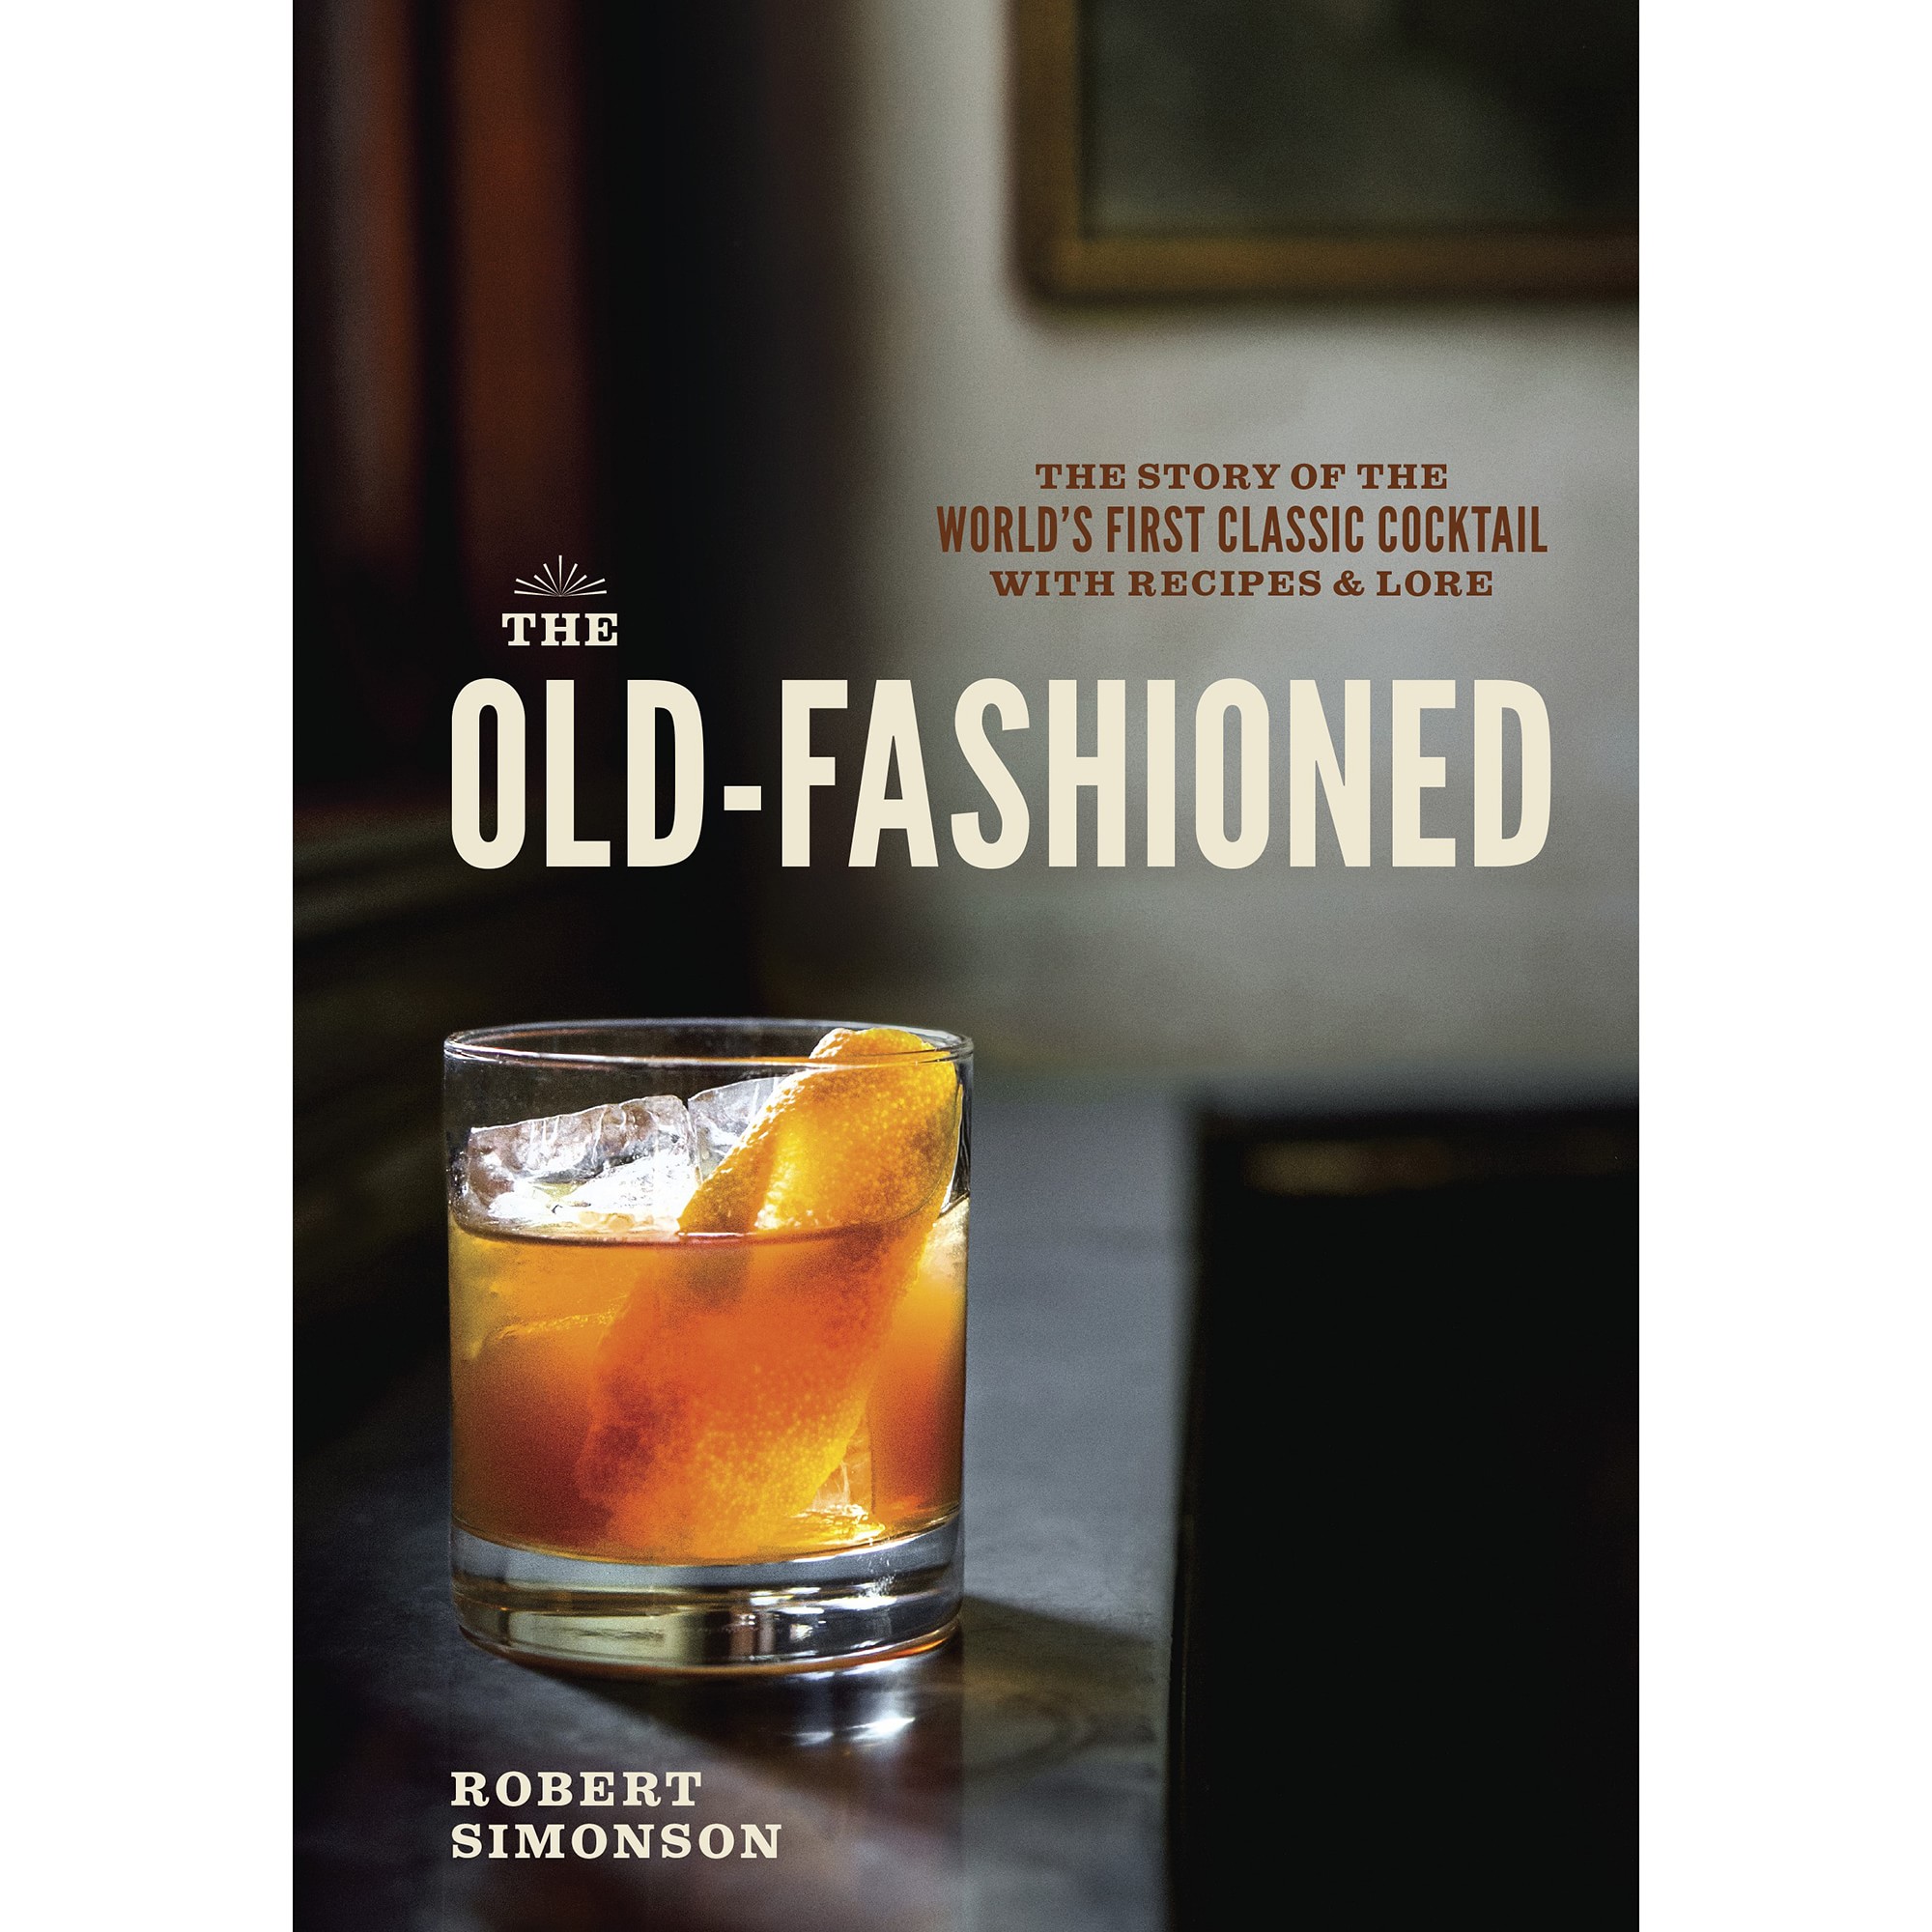 williams-sonoma.com | The Old-Fashioned: The Story of the World's First Classic Cocktail, with Recipes and Lore